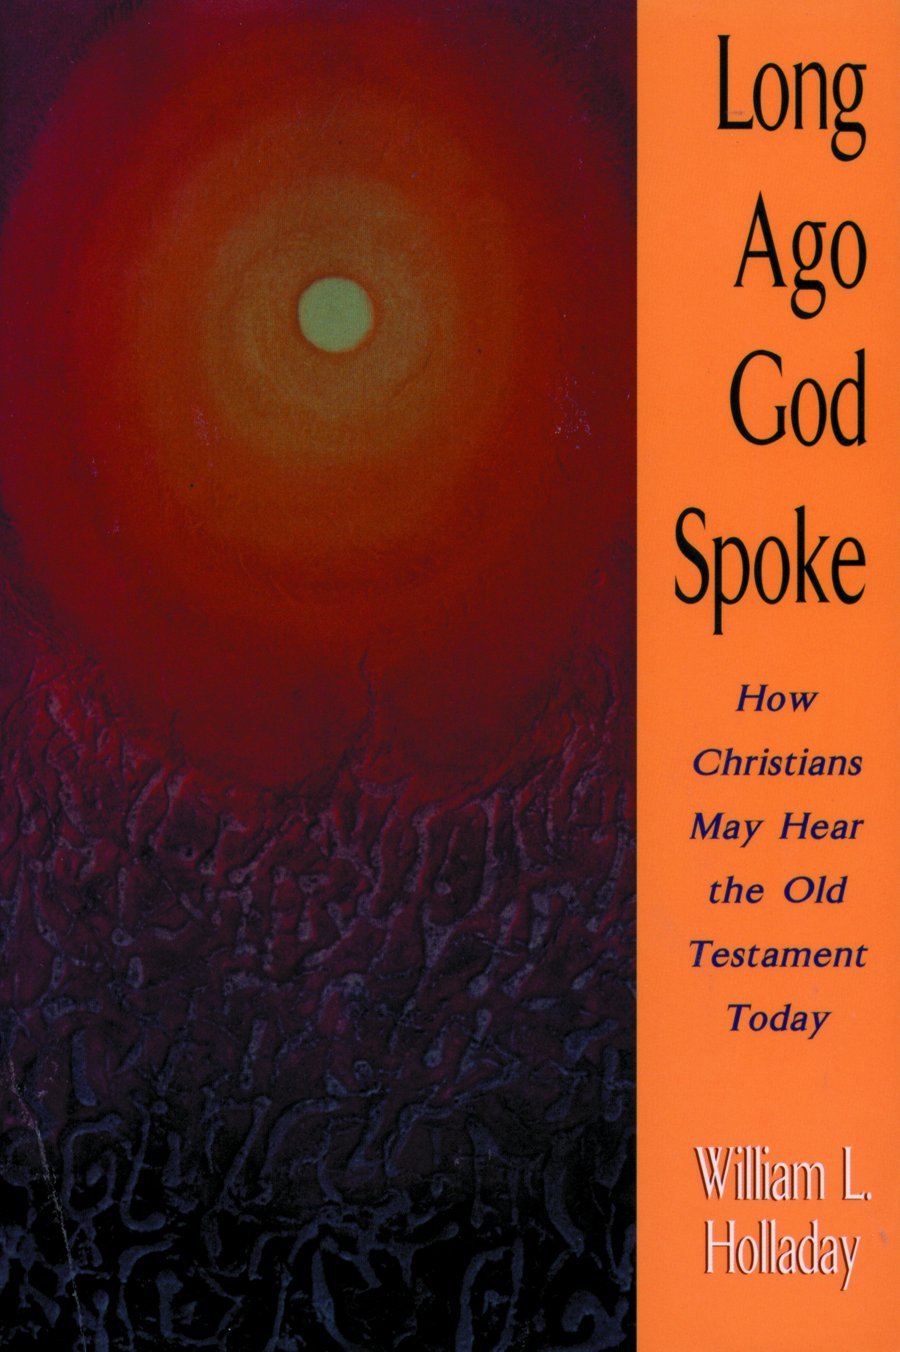 Long Ago God Spoke: How Christians May Hear the Old Testament Today